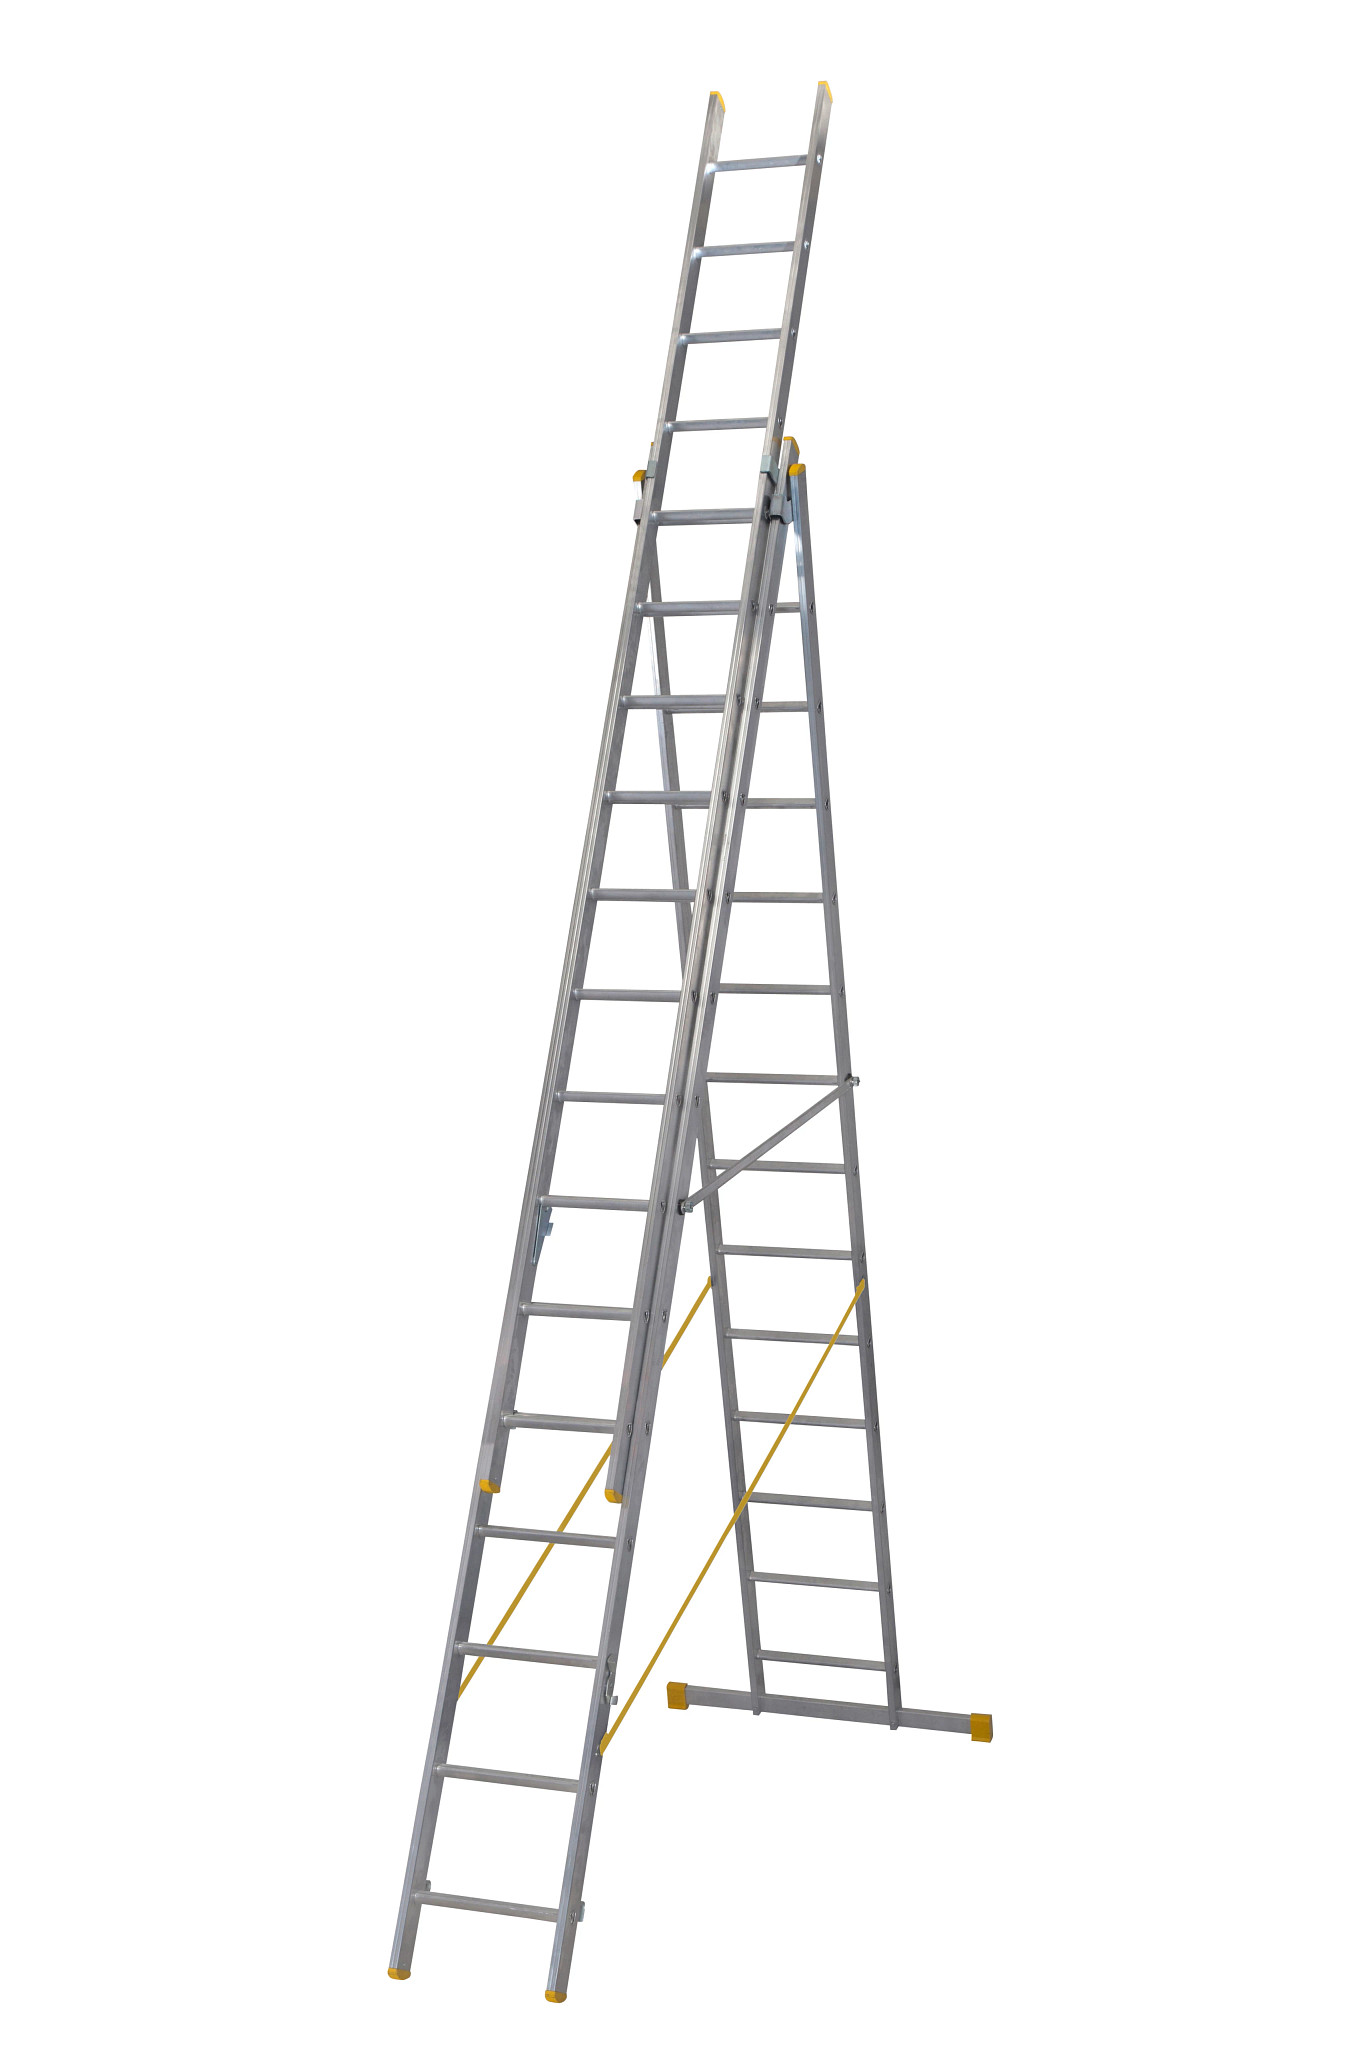 New Werner 725 Series Aluminium Box Section Triple Extension Plus Ladder x4 